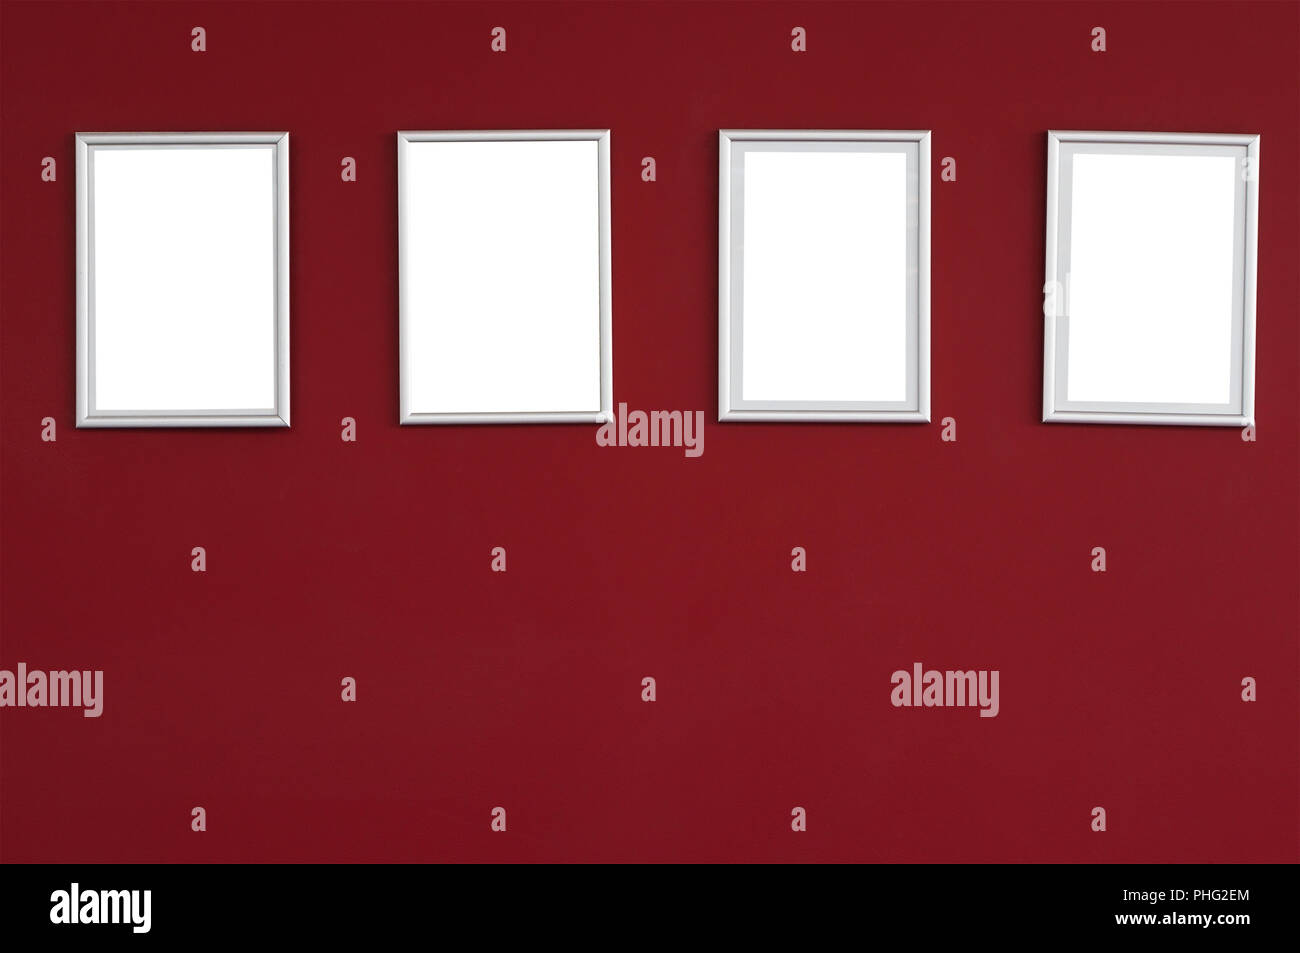 Die reale rote Wand mit Frames Stockfoto